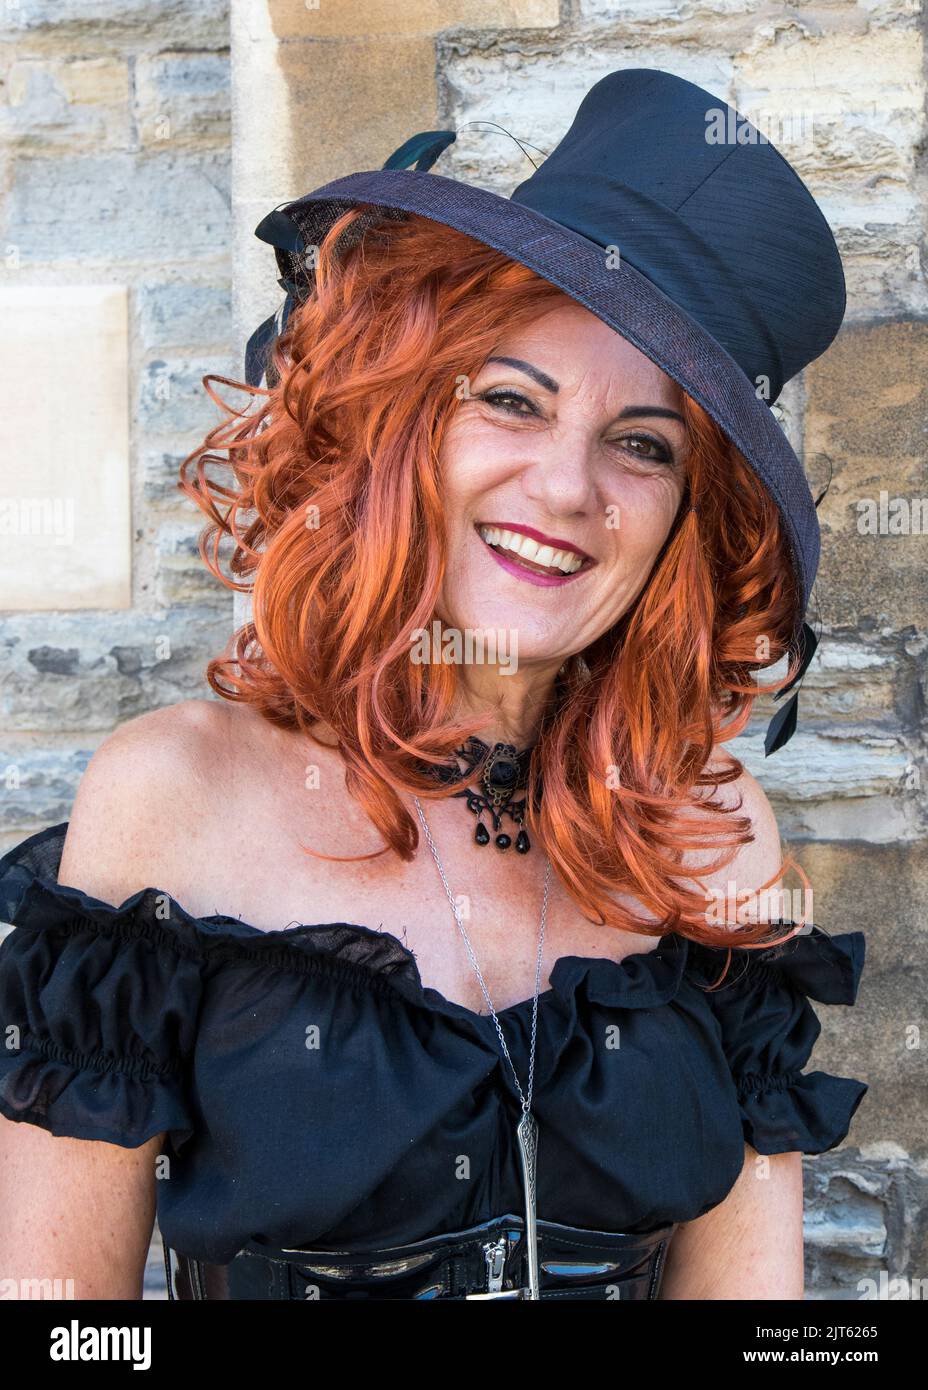 A visit to the Lincoln Asylum Steampunk Festival in 2019 Stock Photo